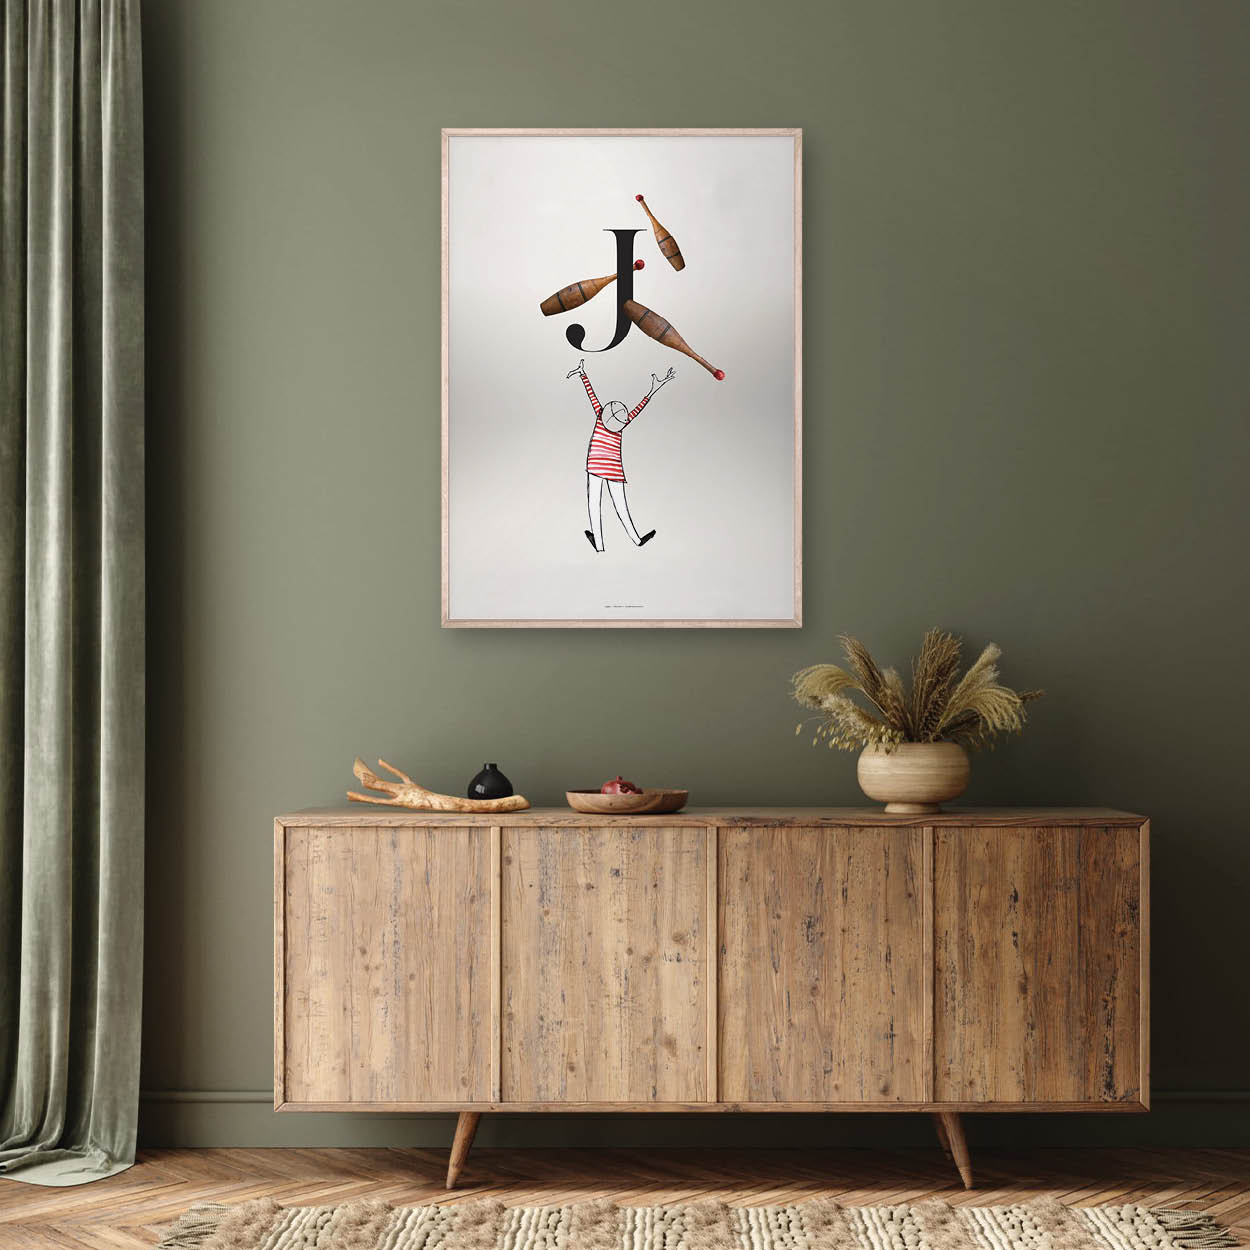  Circus Collection J is for Juggle modern scandi living room wall art inspo